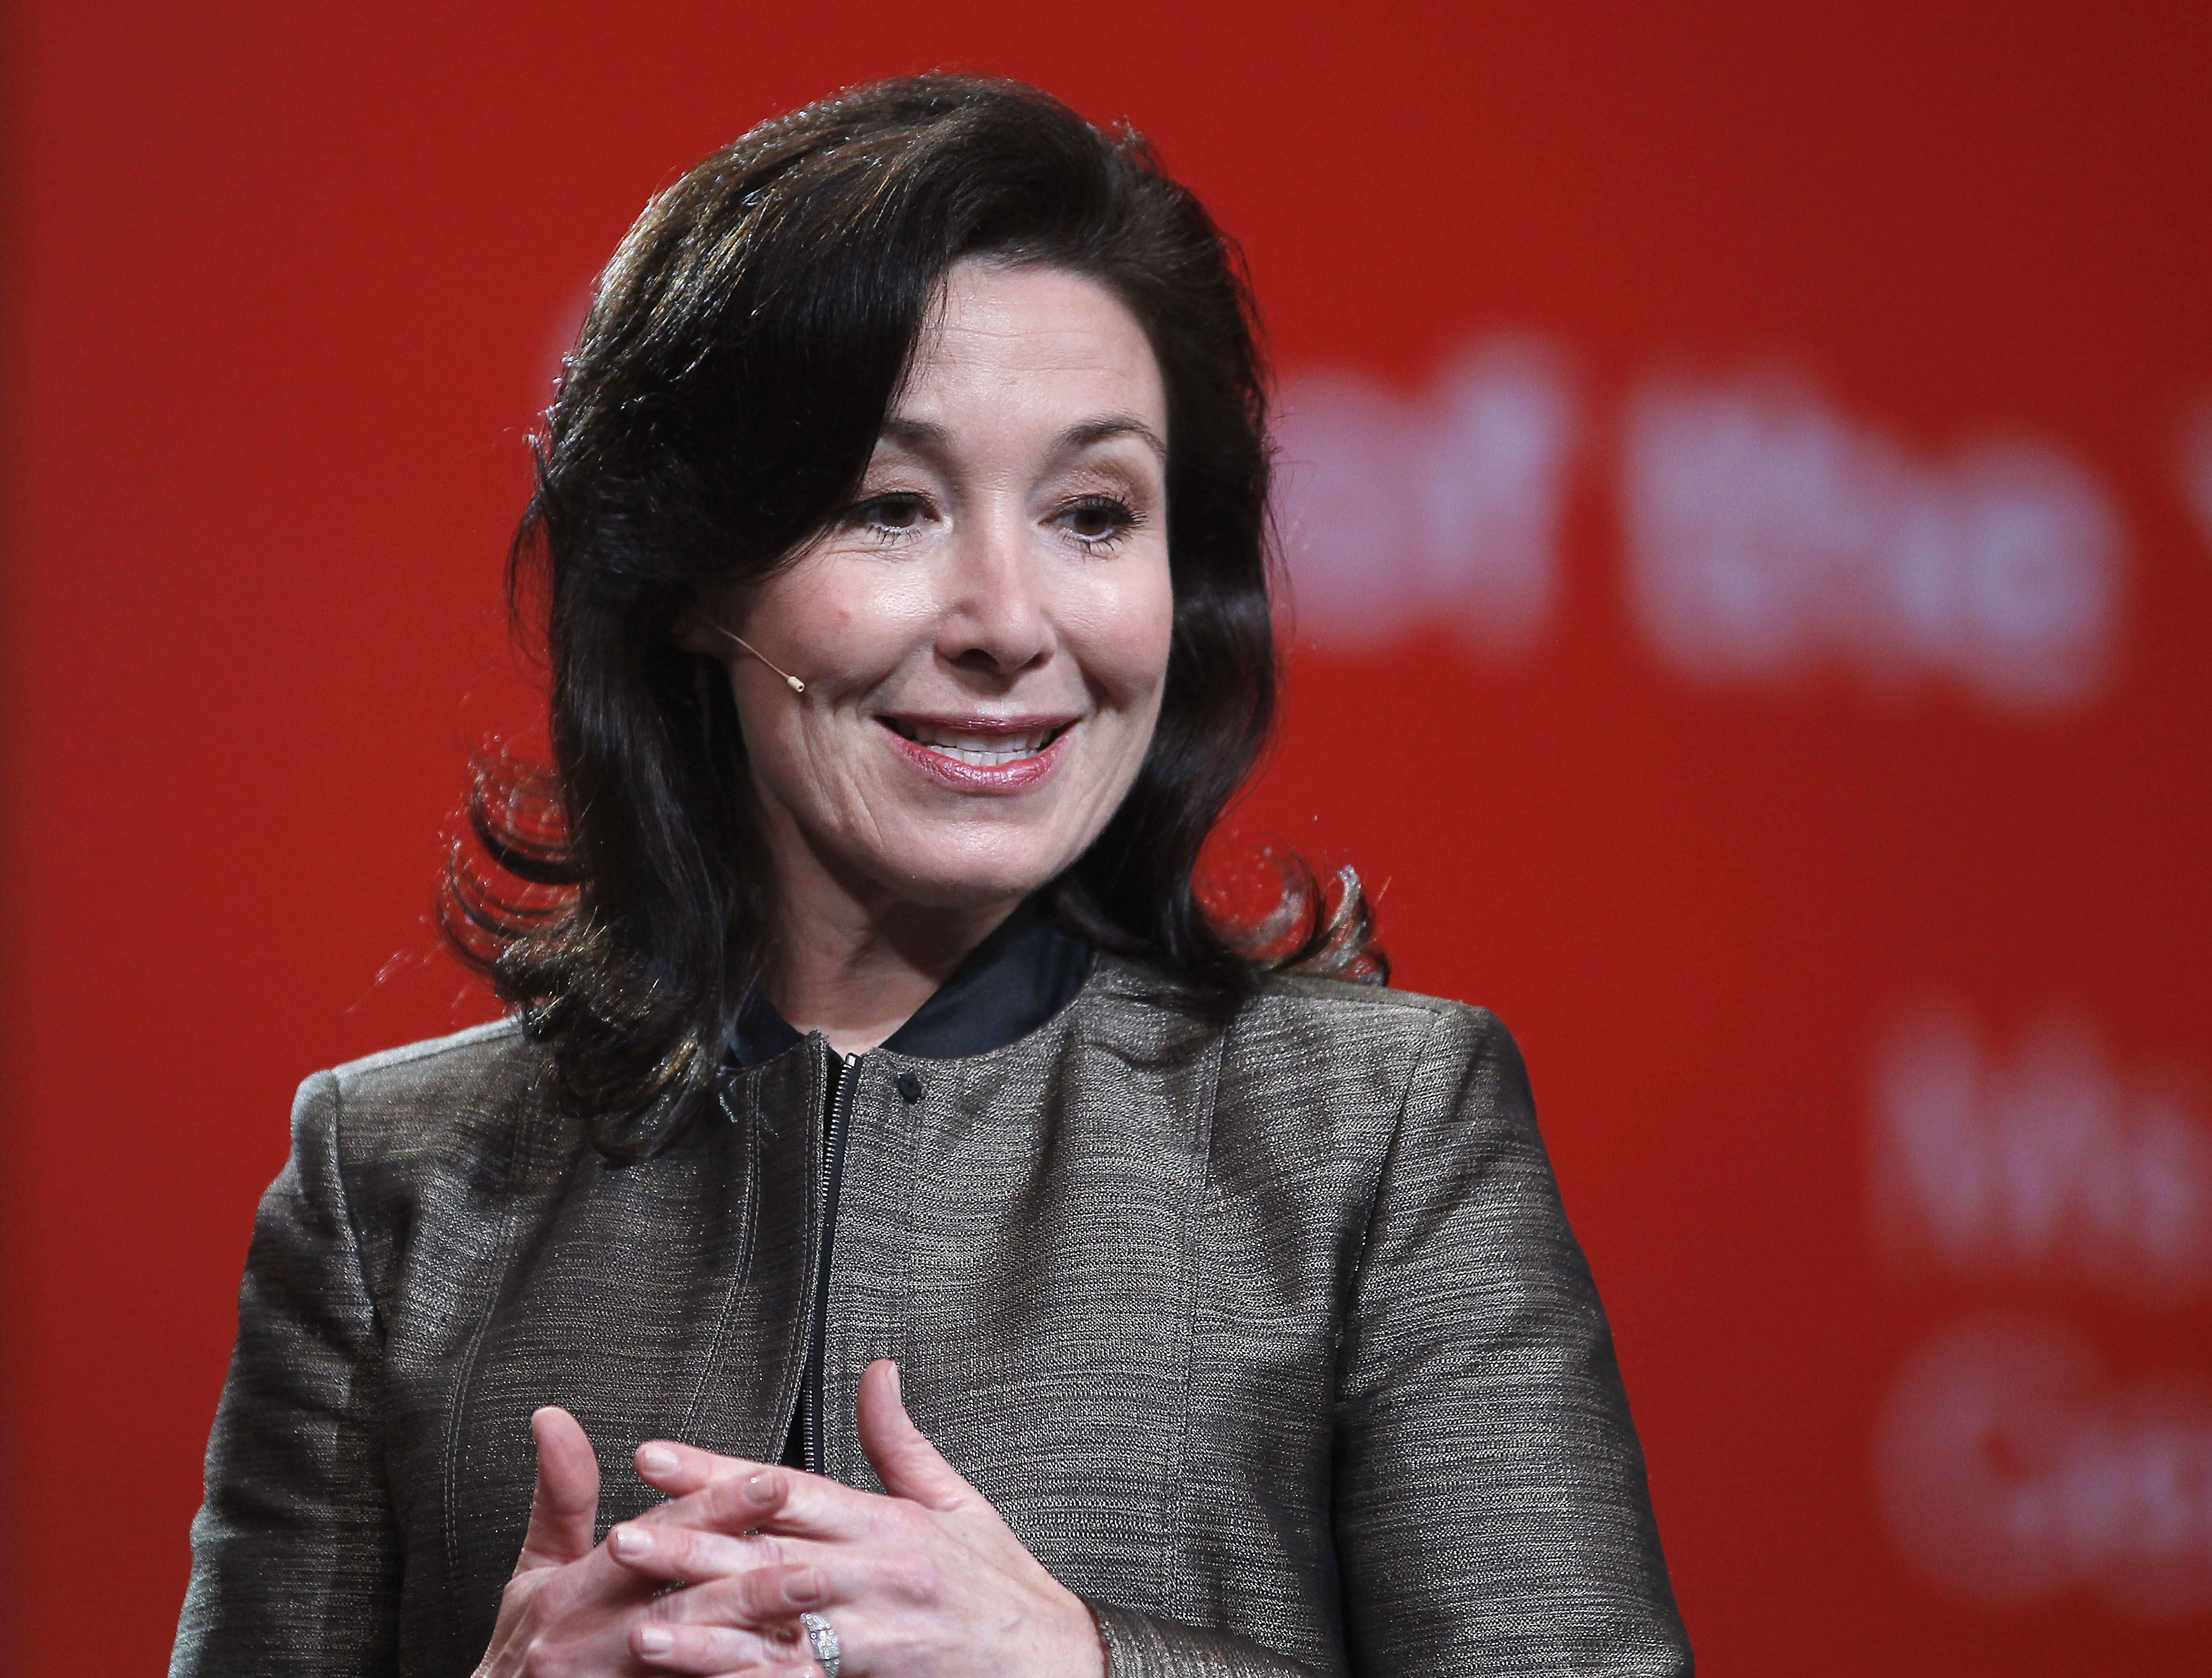 Safra Catz speaks at the Oracle OpenWorld Conference in San Francisco, on Sept. 19, 2010. (Tony Avelar—Bloomberg/Getty Images)